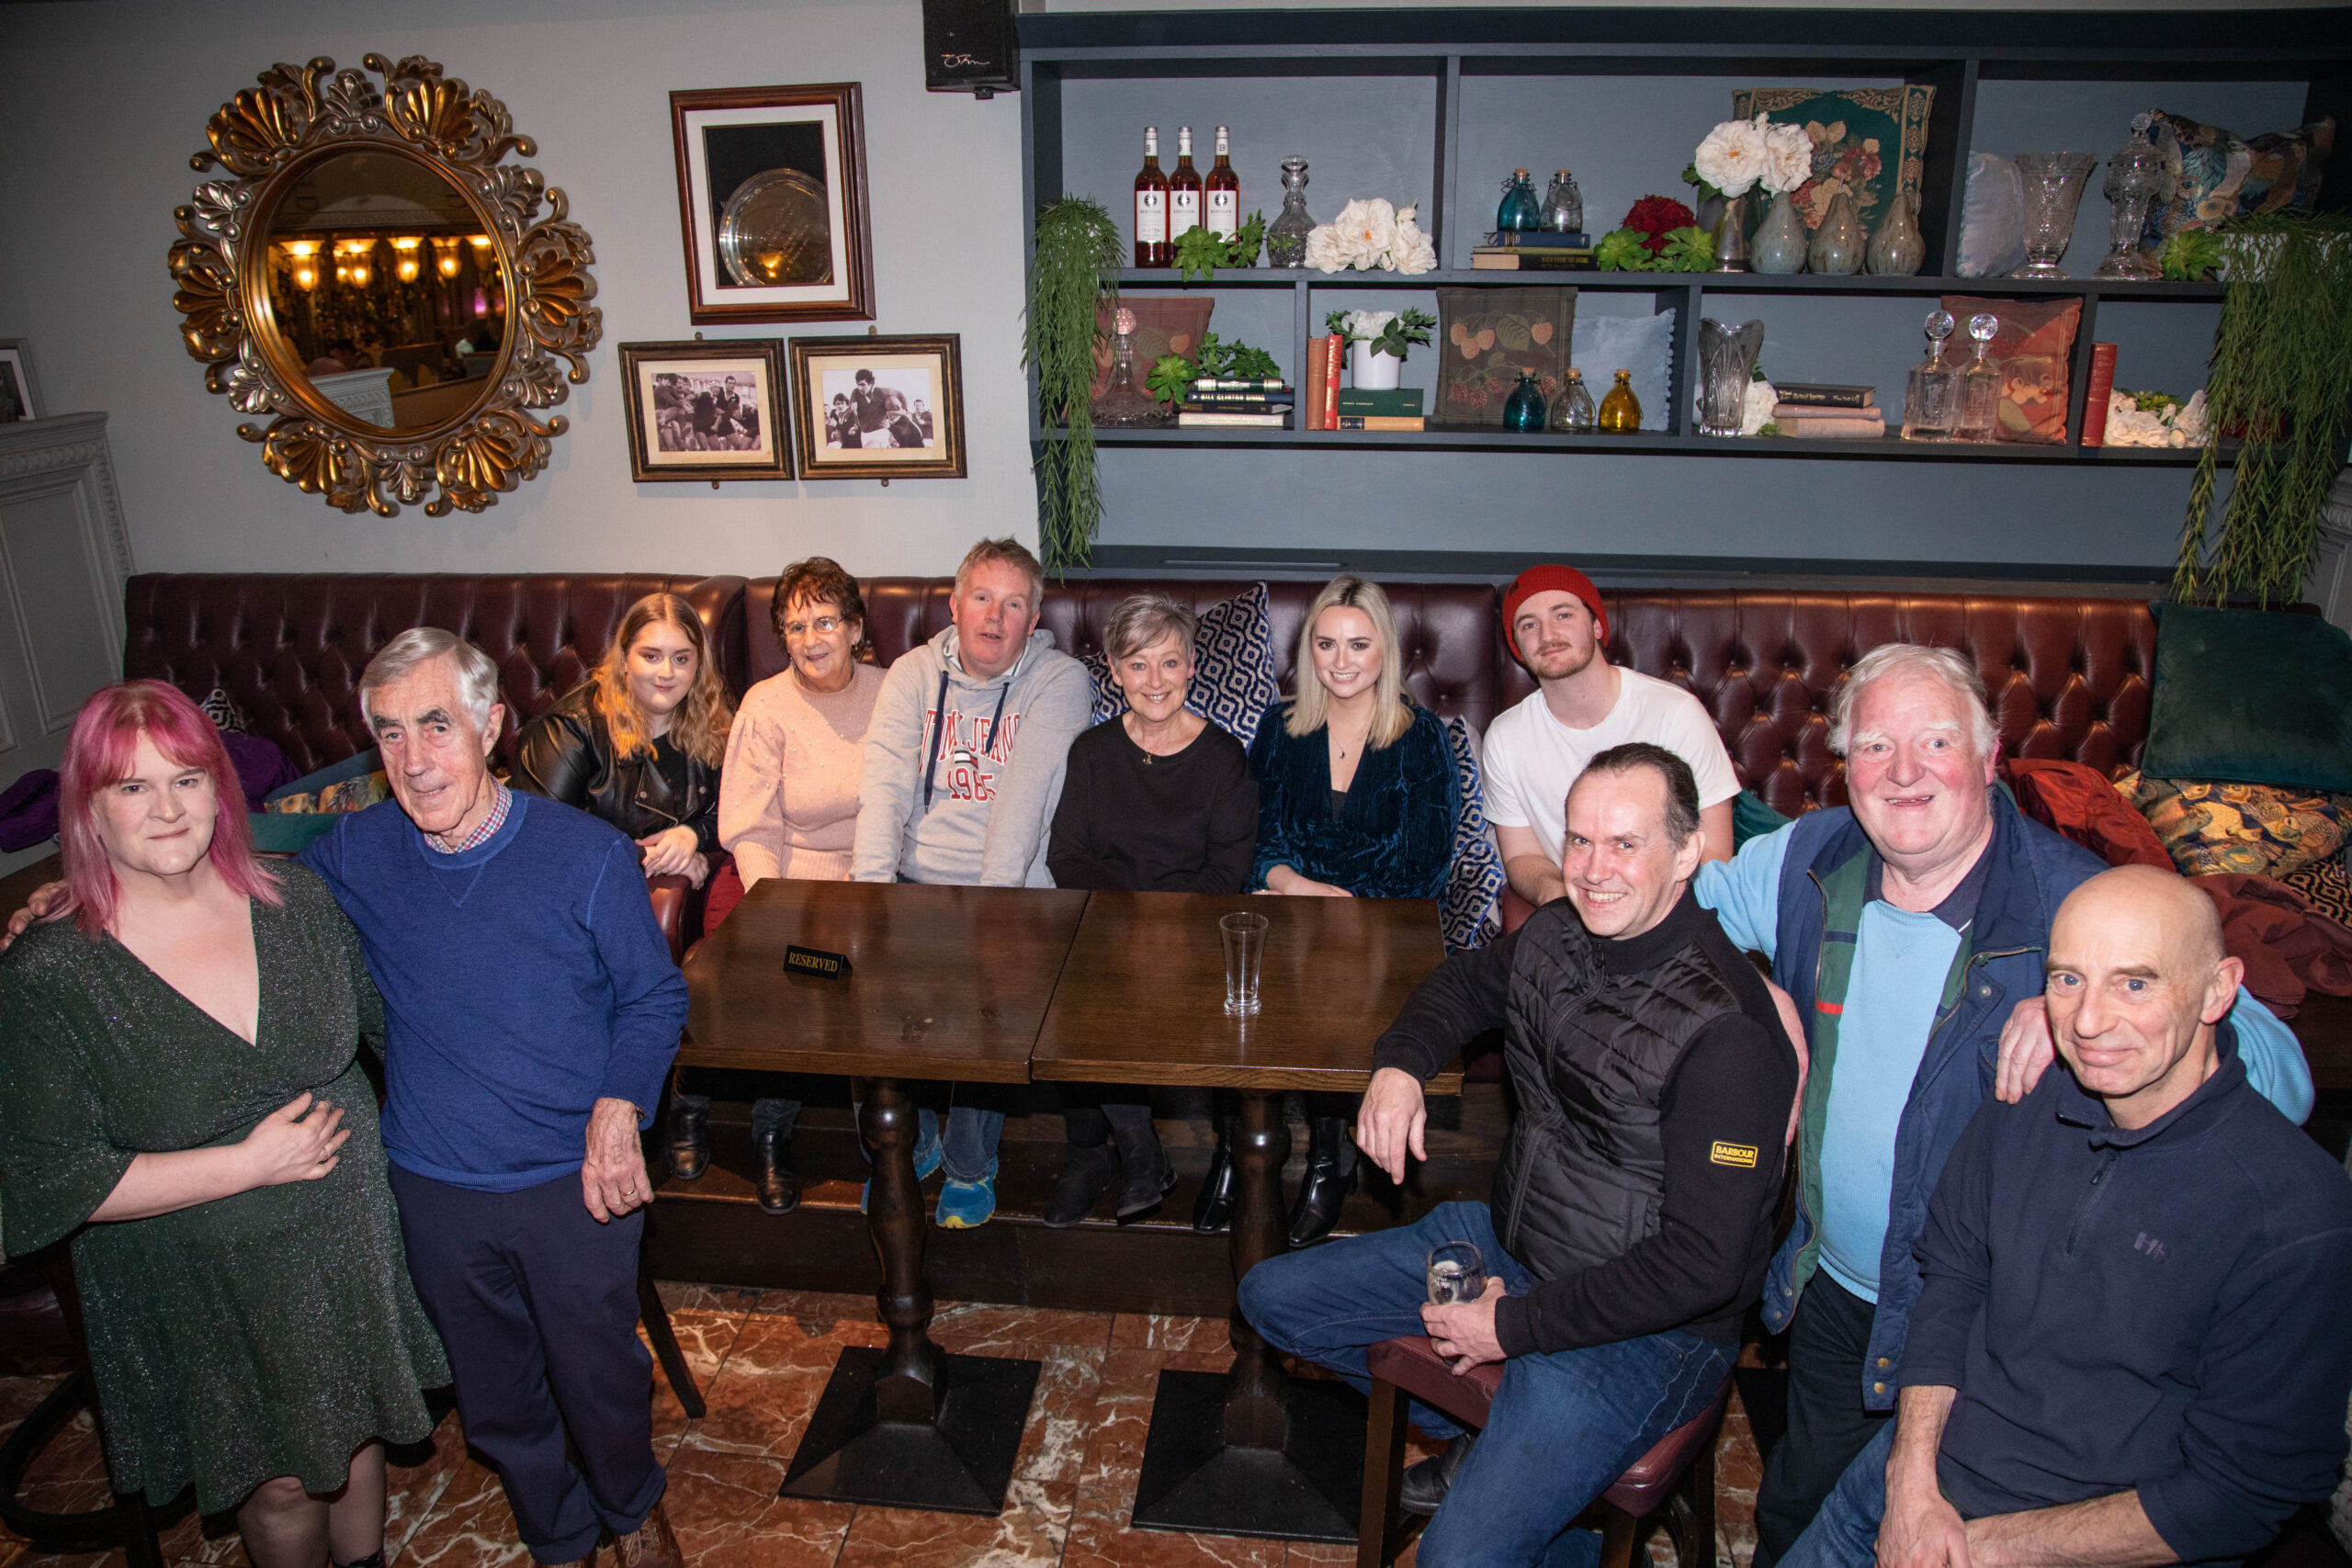 Some of the Torch Players cast and crew at the launch of Torch Players new production SIVE in Souths Bar running for 5 performances at Belltable from March 7-11. Photographer_ Stuart Mackey